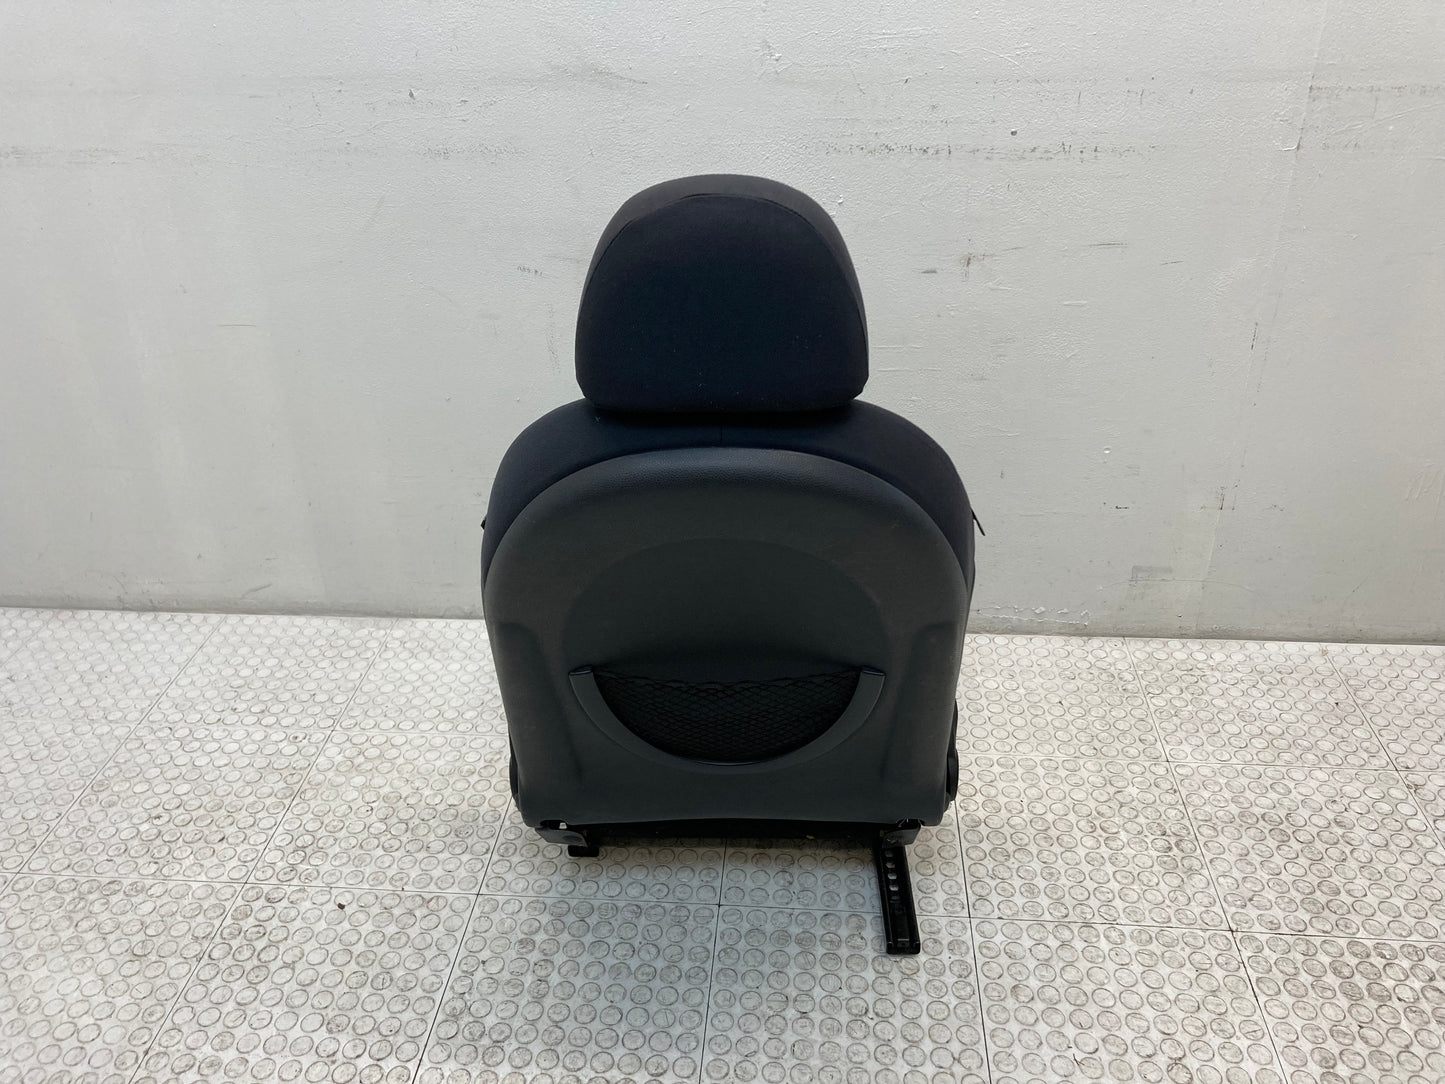 Mini Cooper Seats Fabric Space Panther Black Heated S4PN 05-06 R53 410